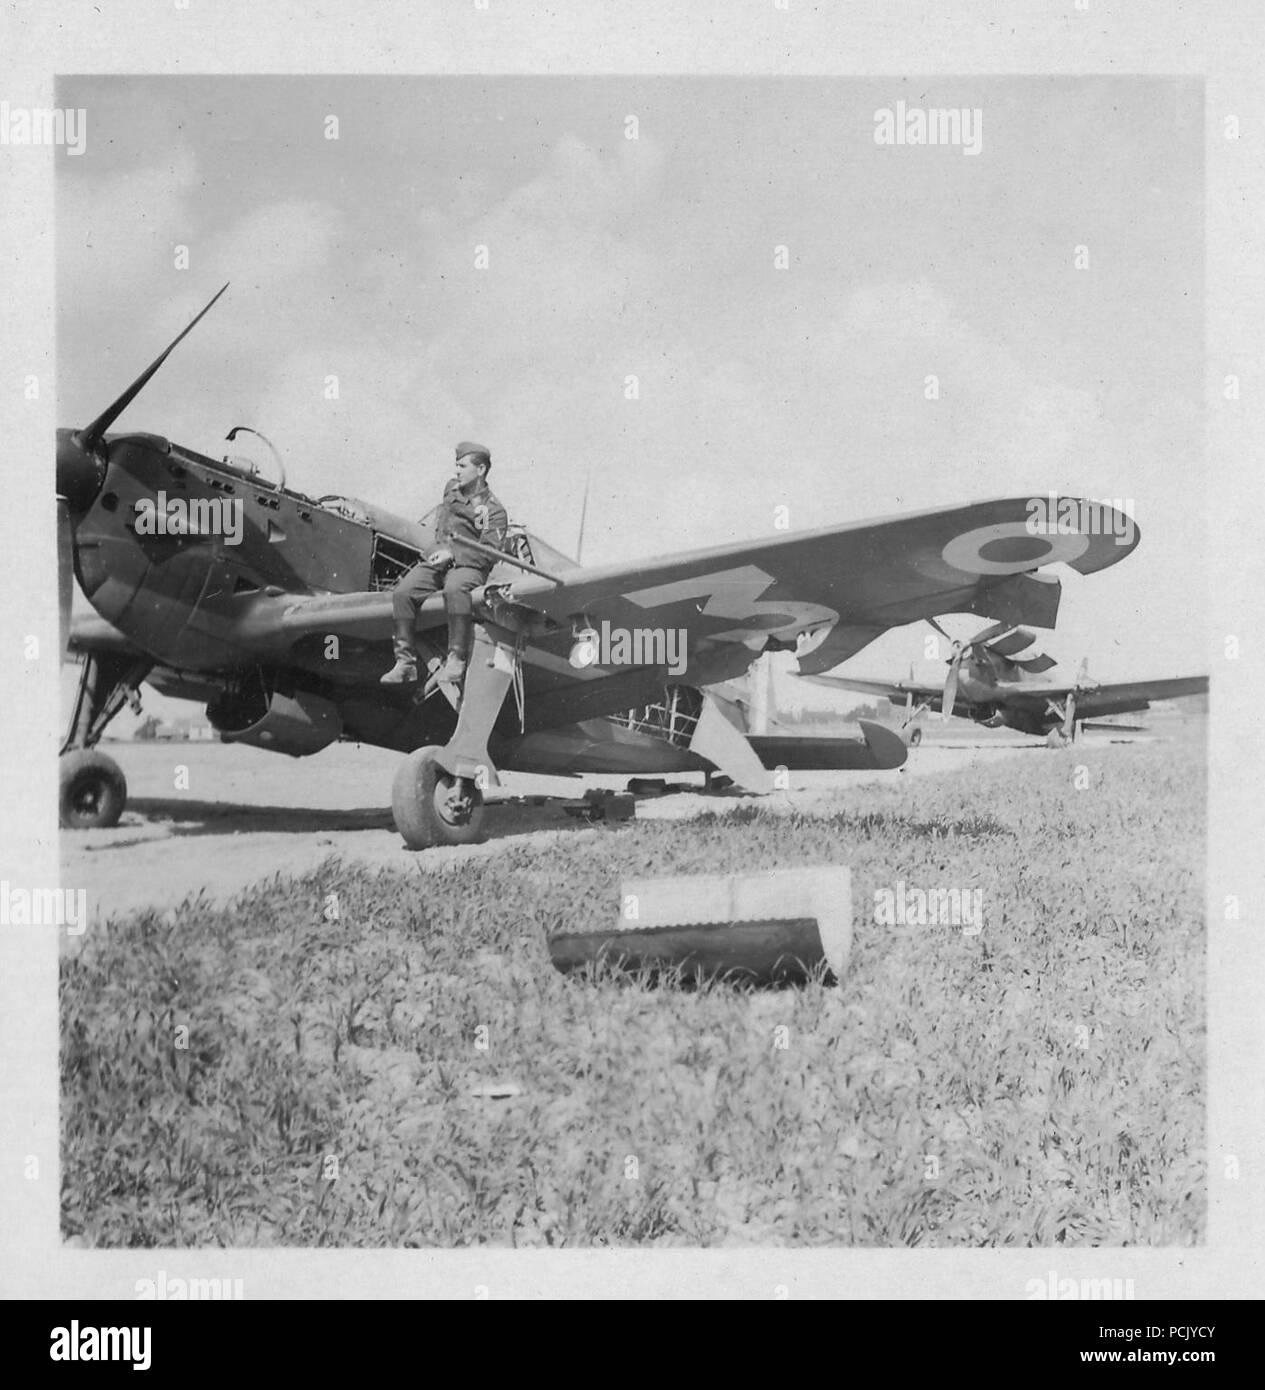 Image from a photo album relating to II. Gruppe, Jagdgeschwader 3: A French Morane-Saunier MS406-C1 fighter provides the perch for a Luftwaffe Gegreiter of II./JG 3, on a captured airfield in France, summer 1940. Stock Photo